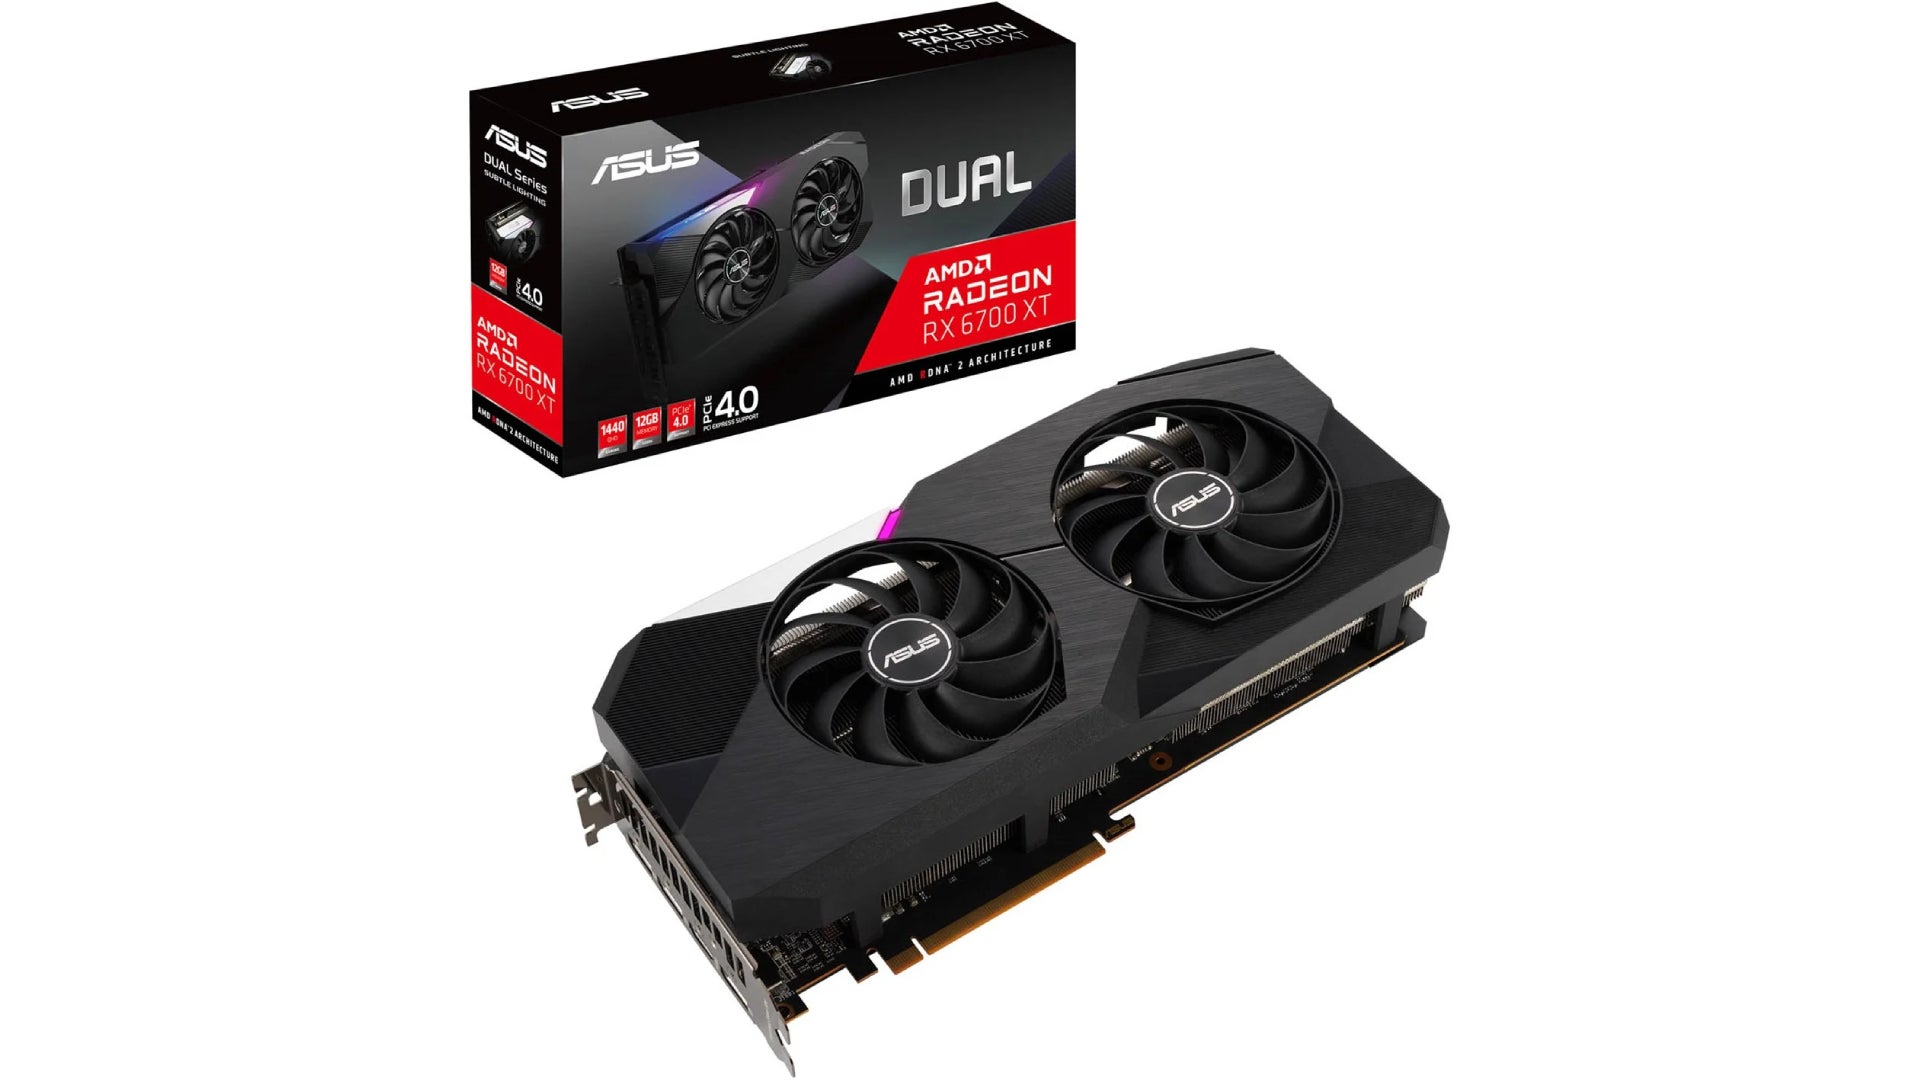 Image for Upgrade your PC with a Radeon RX 6700 XT GPU for £415 in CCL's January sale